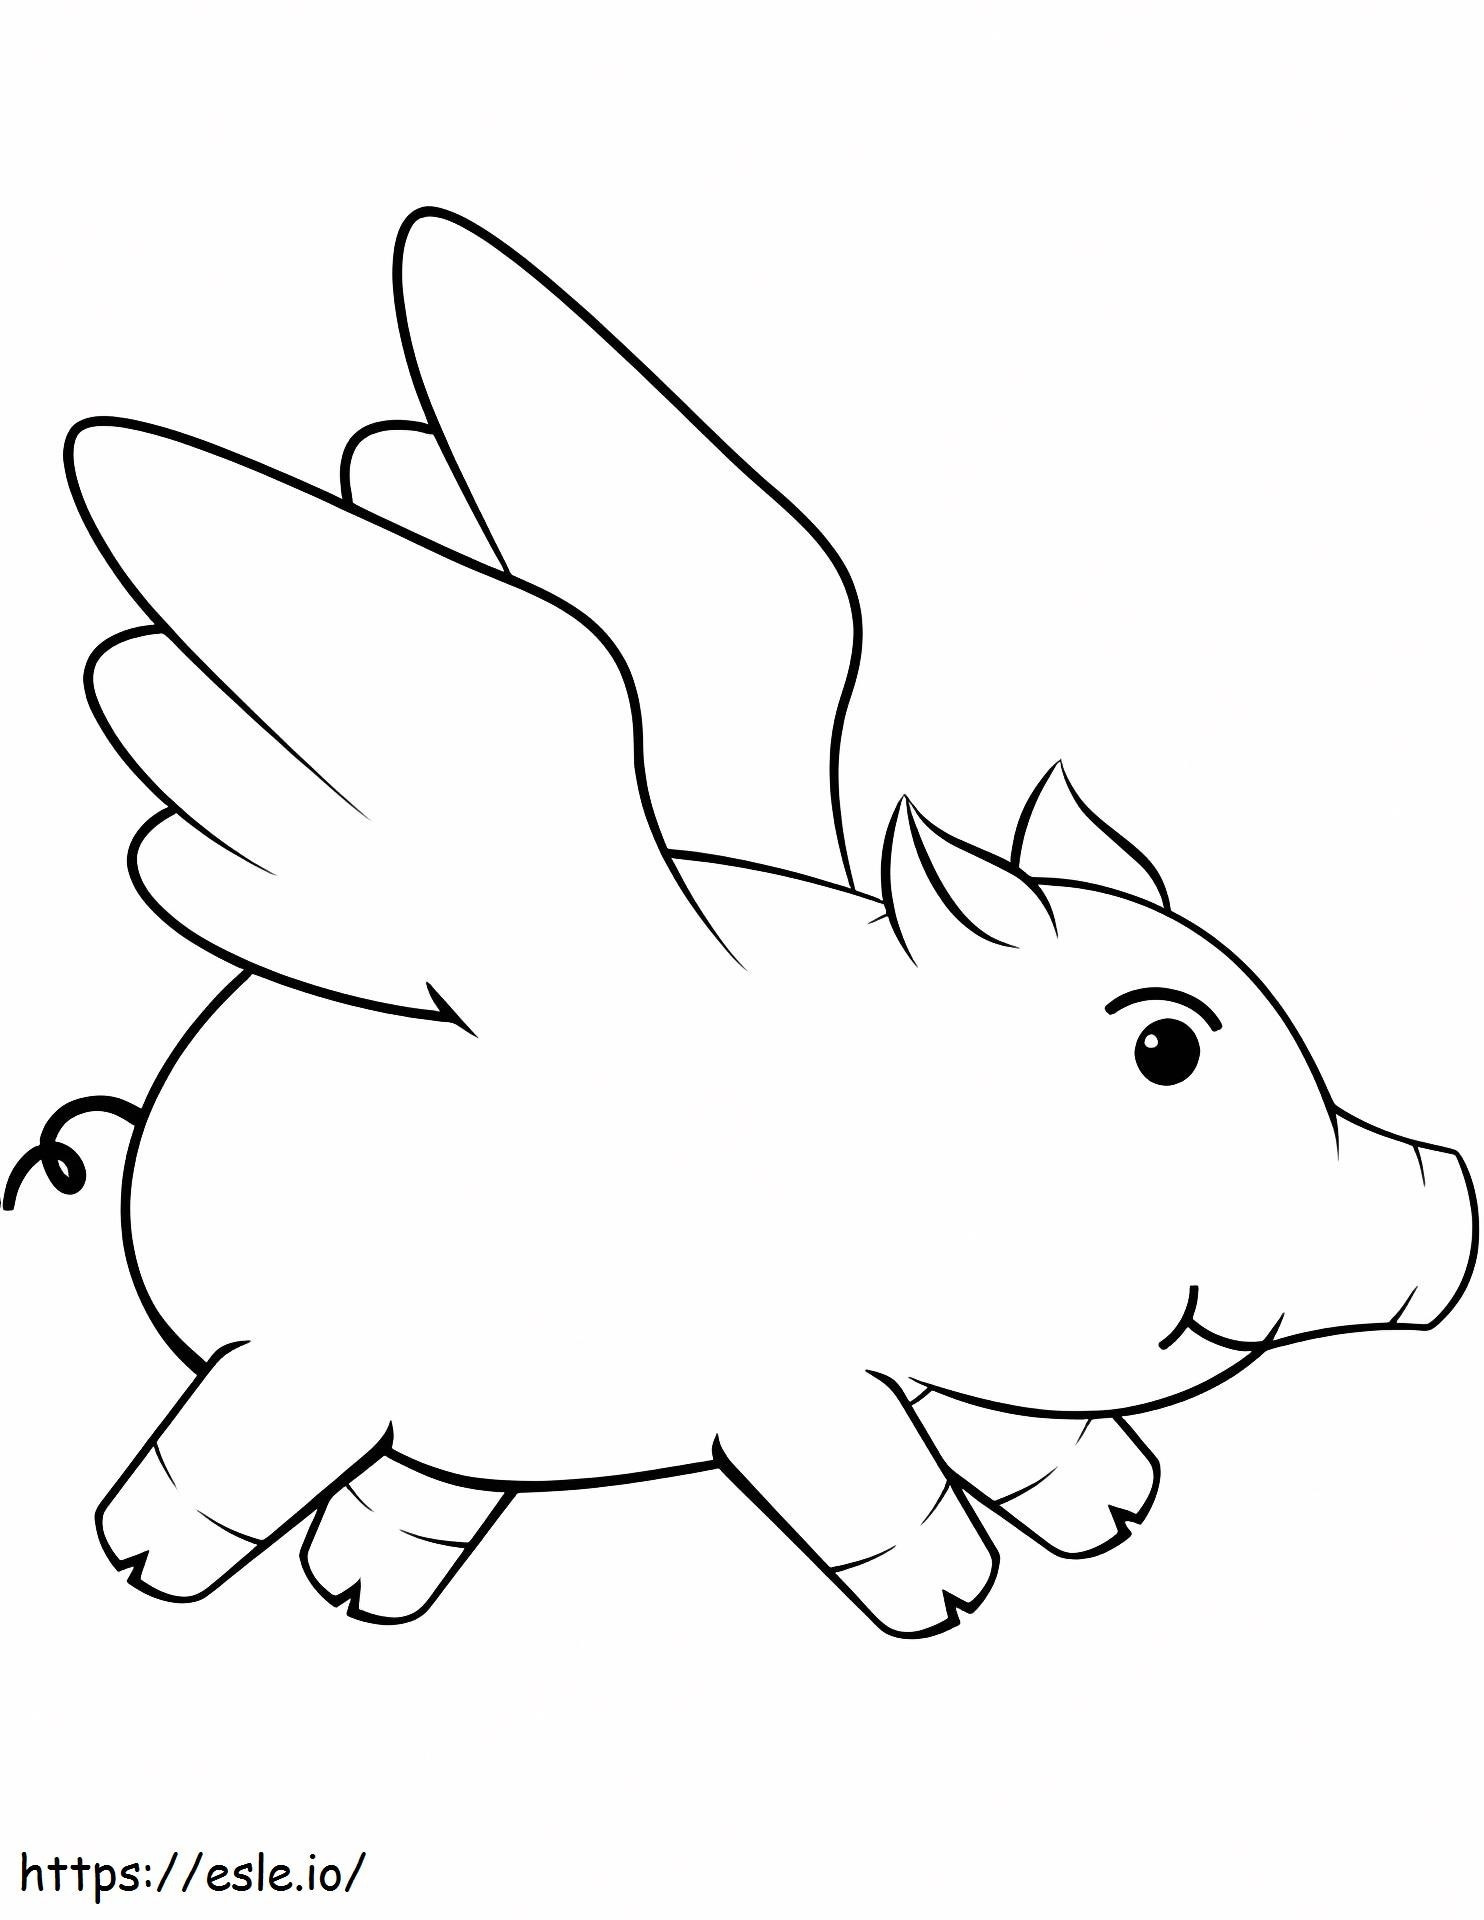 Pig Flight coloring page